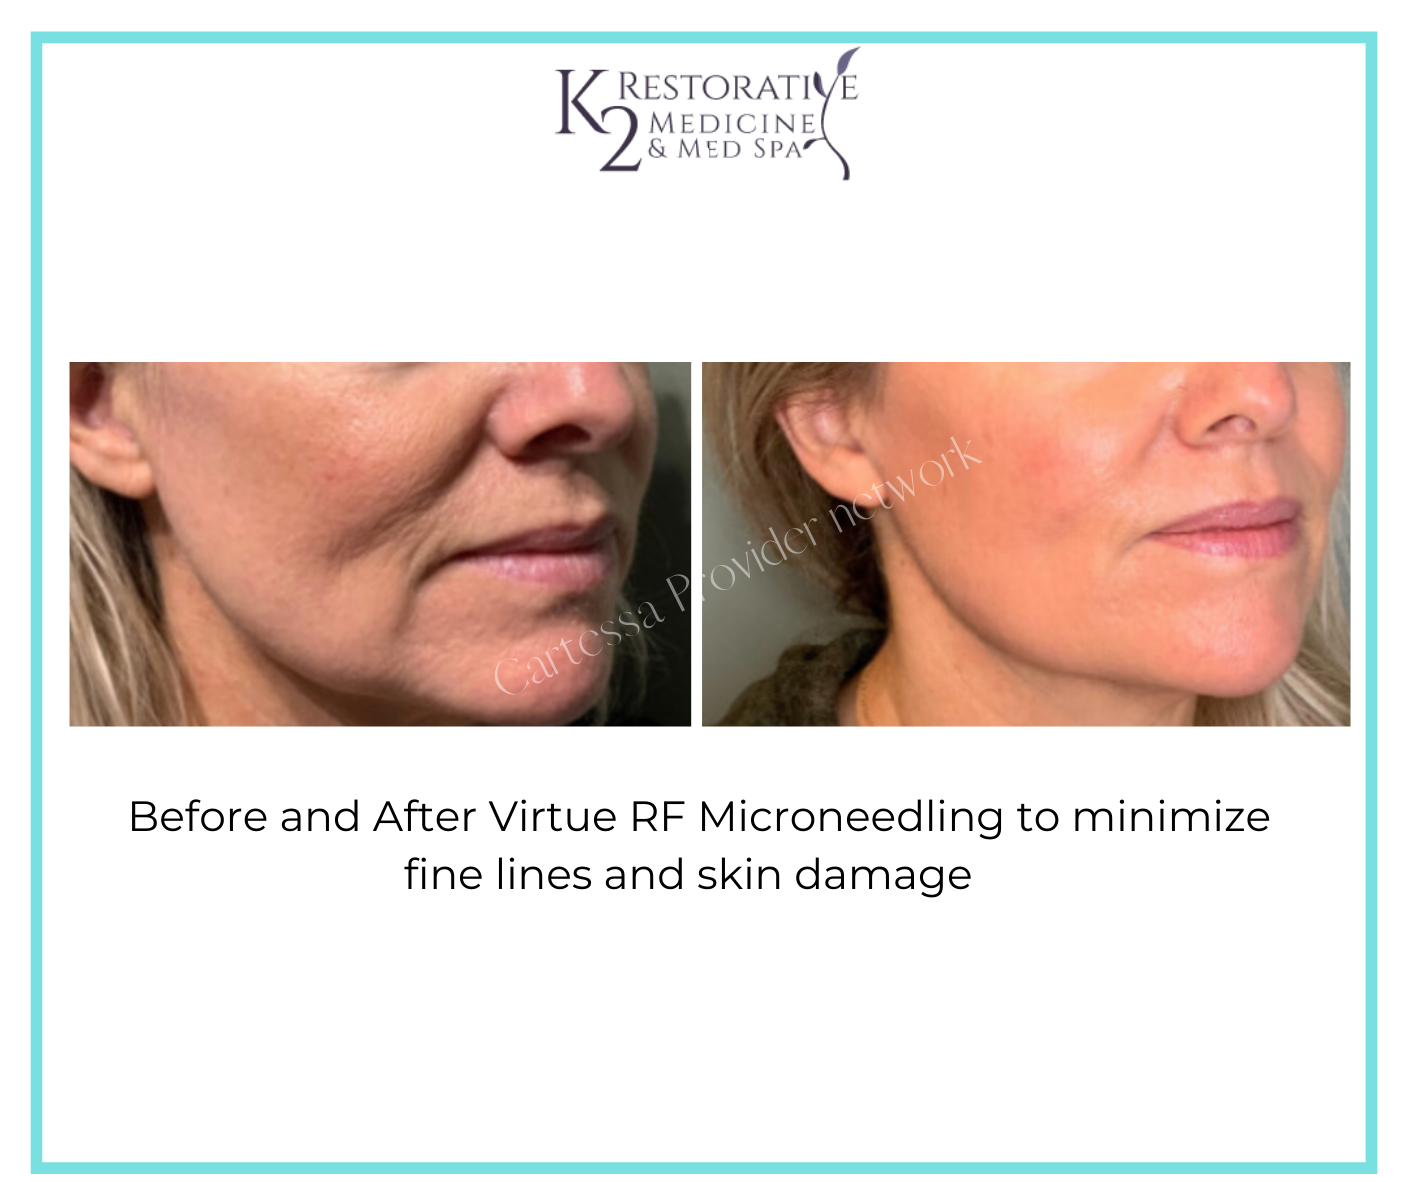 Before and After Virtue RF Microneedling Results